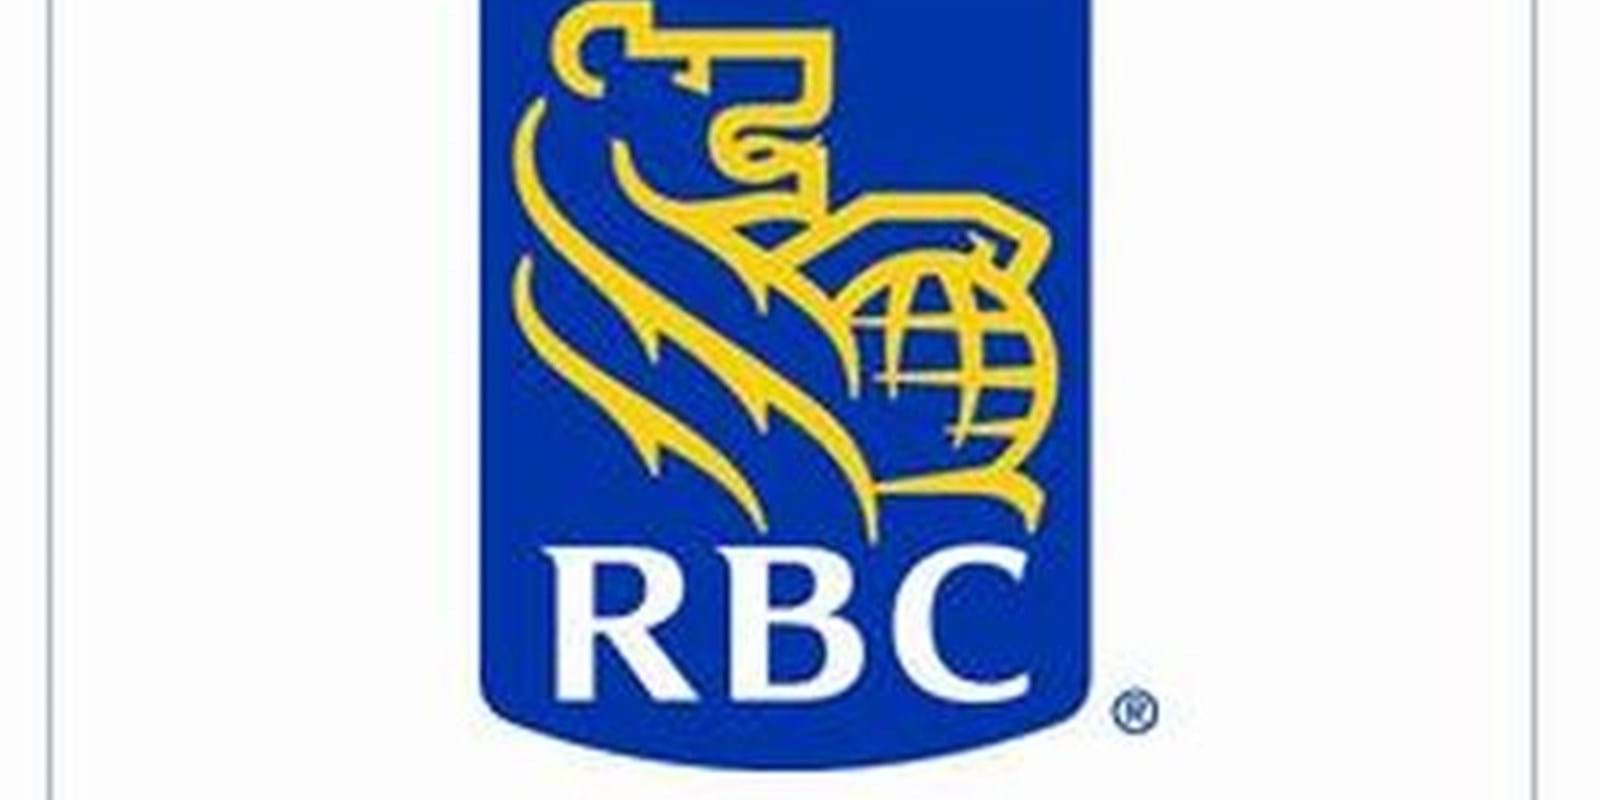 Modest growth expected for Quebec's economy in 2007, says RBC